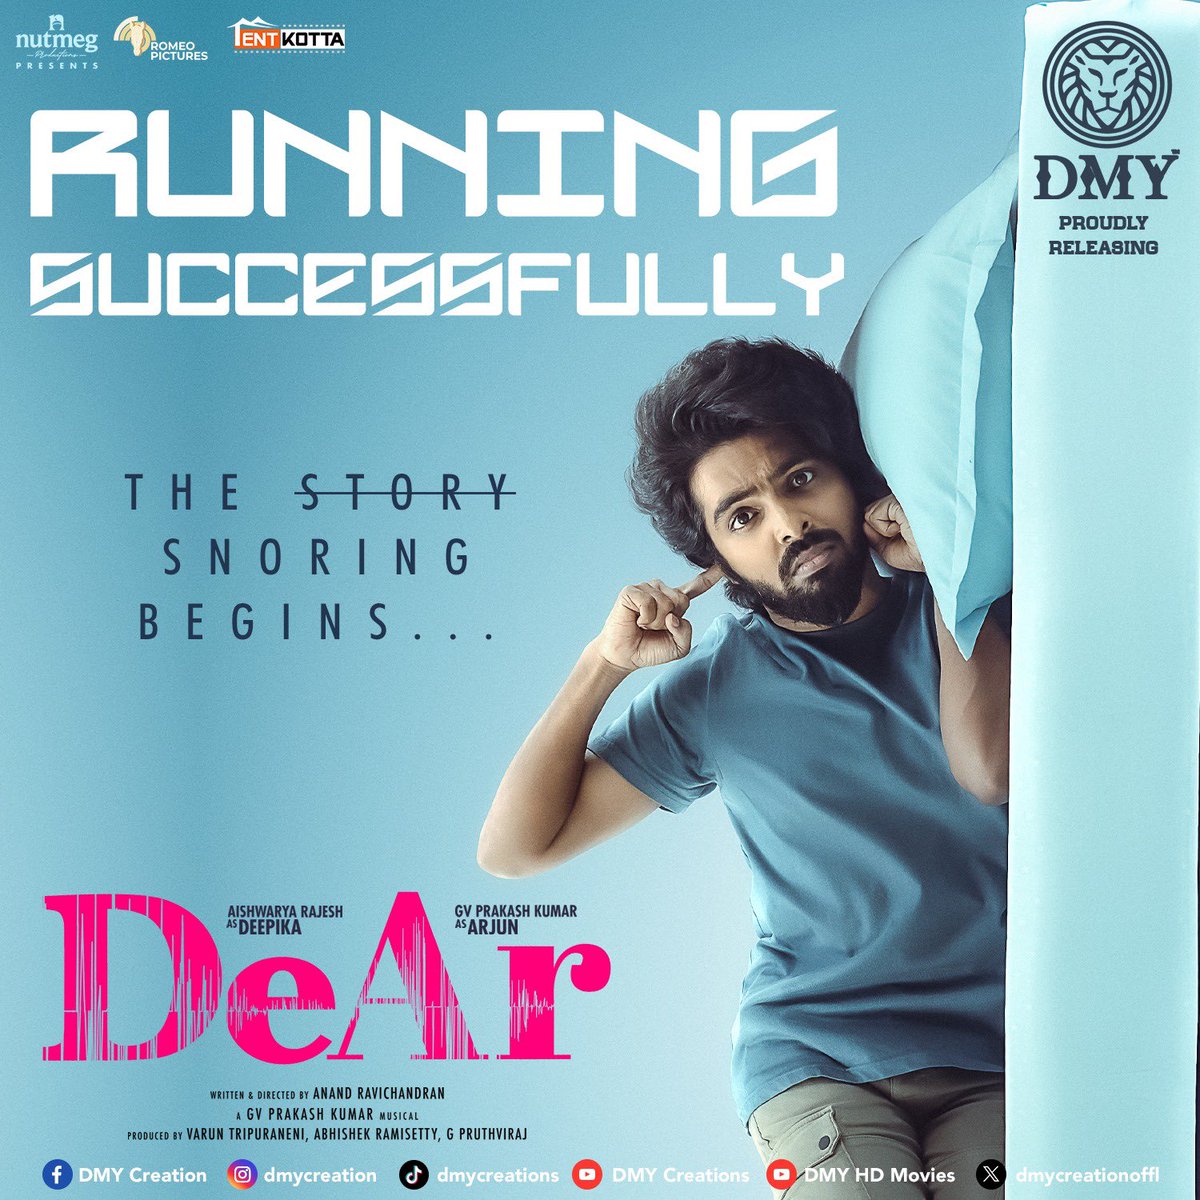 Get ready for a rollercoaster ride of emotions with #DeAr 😴💤 Now showing in theaters near you 🎞️ Grab your popcorn and join the journey 🍿 @gvprakash @aishu_dil @Anand_Rchandran @tvaroon #AbhishekRamisetty #PruthvirajGK @mynameisraahul #RomeoPictures @jagadeesh_s_v